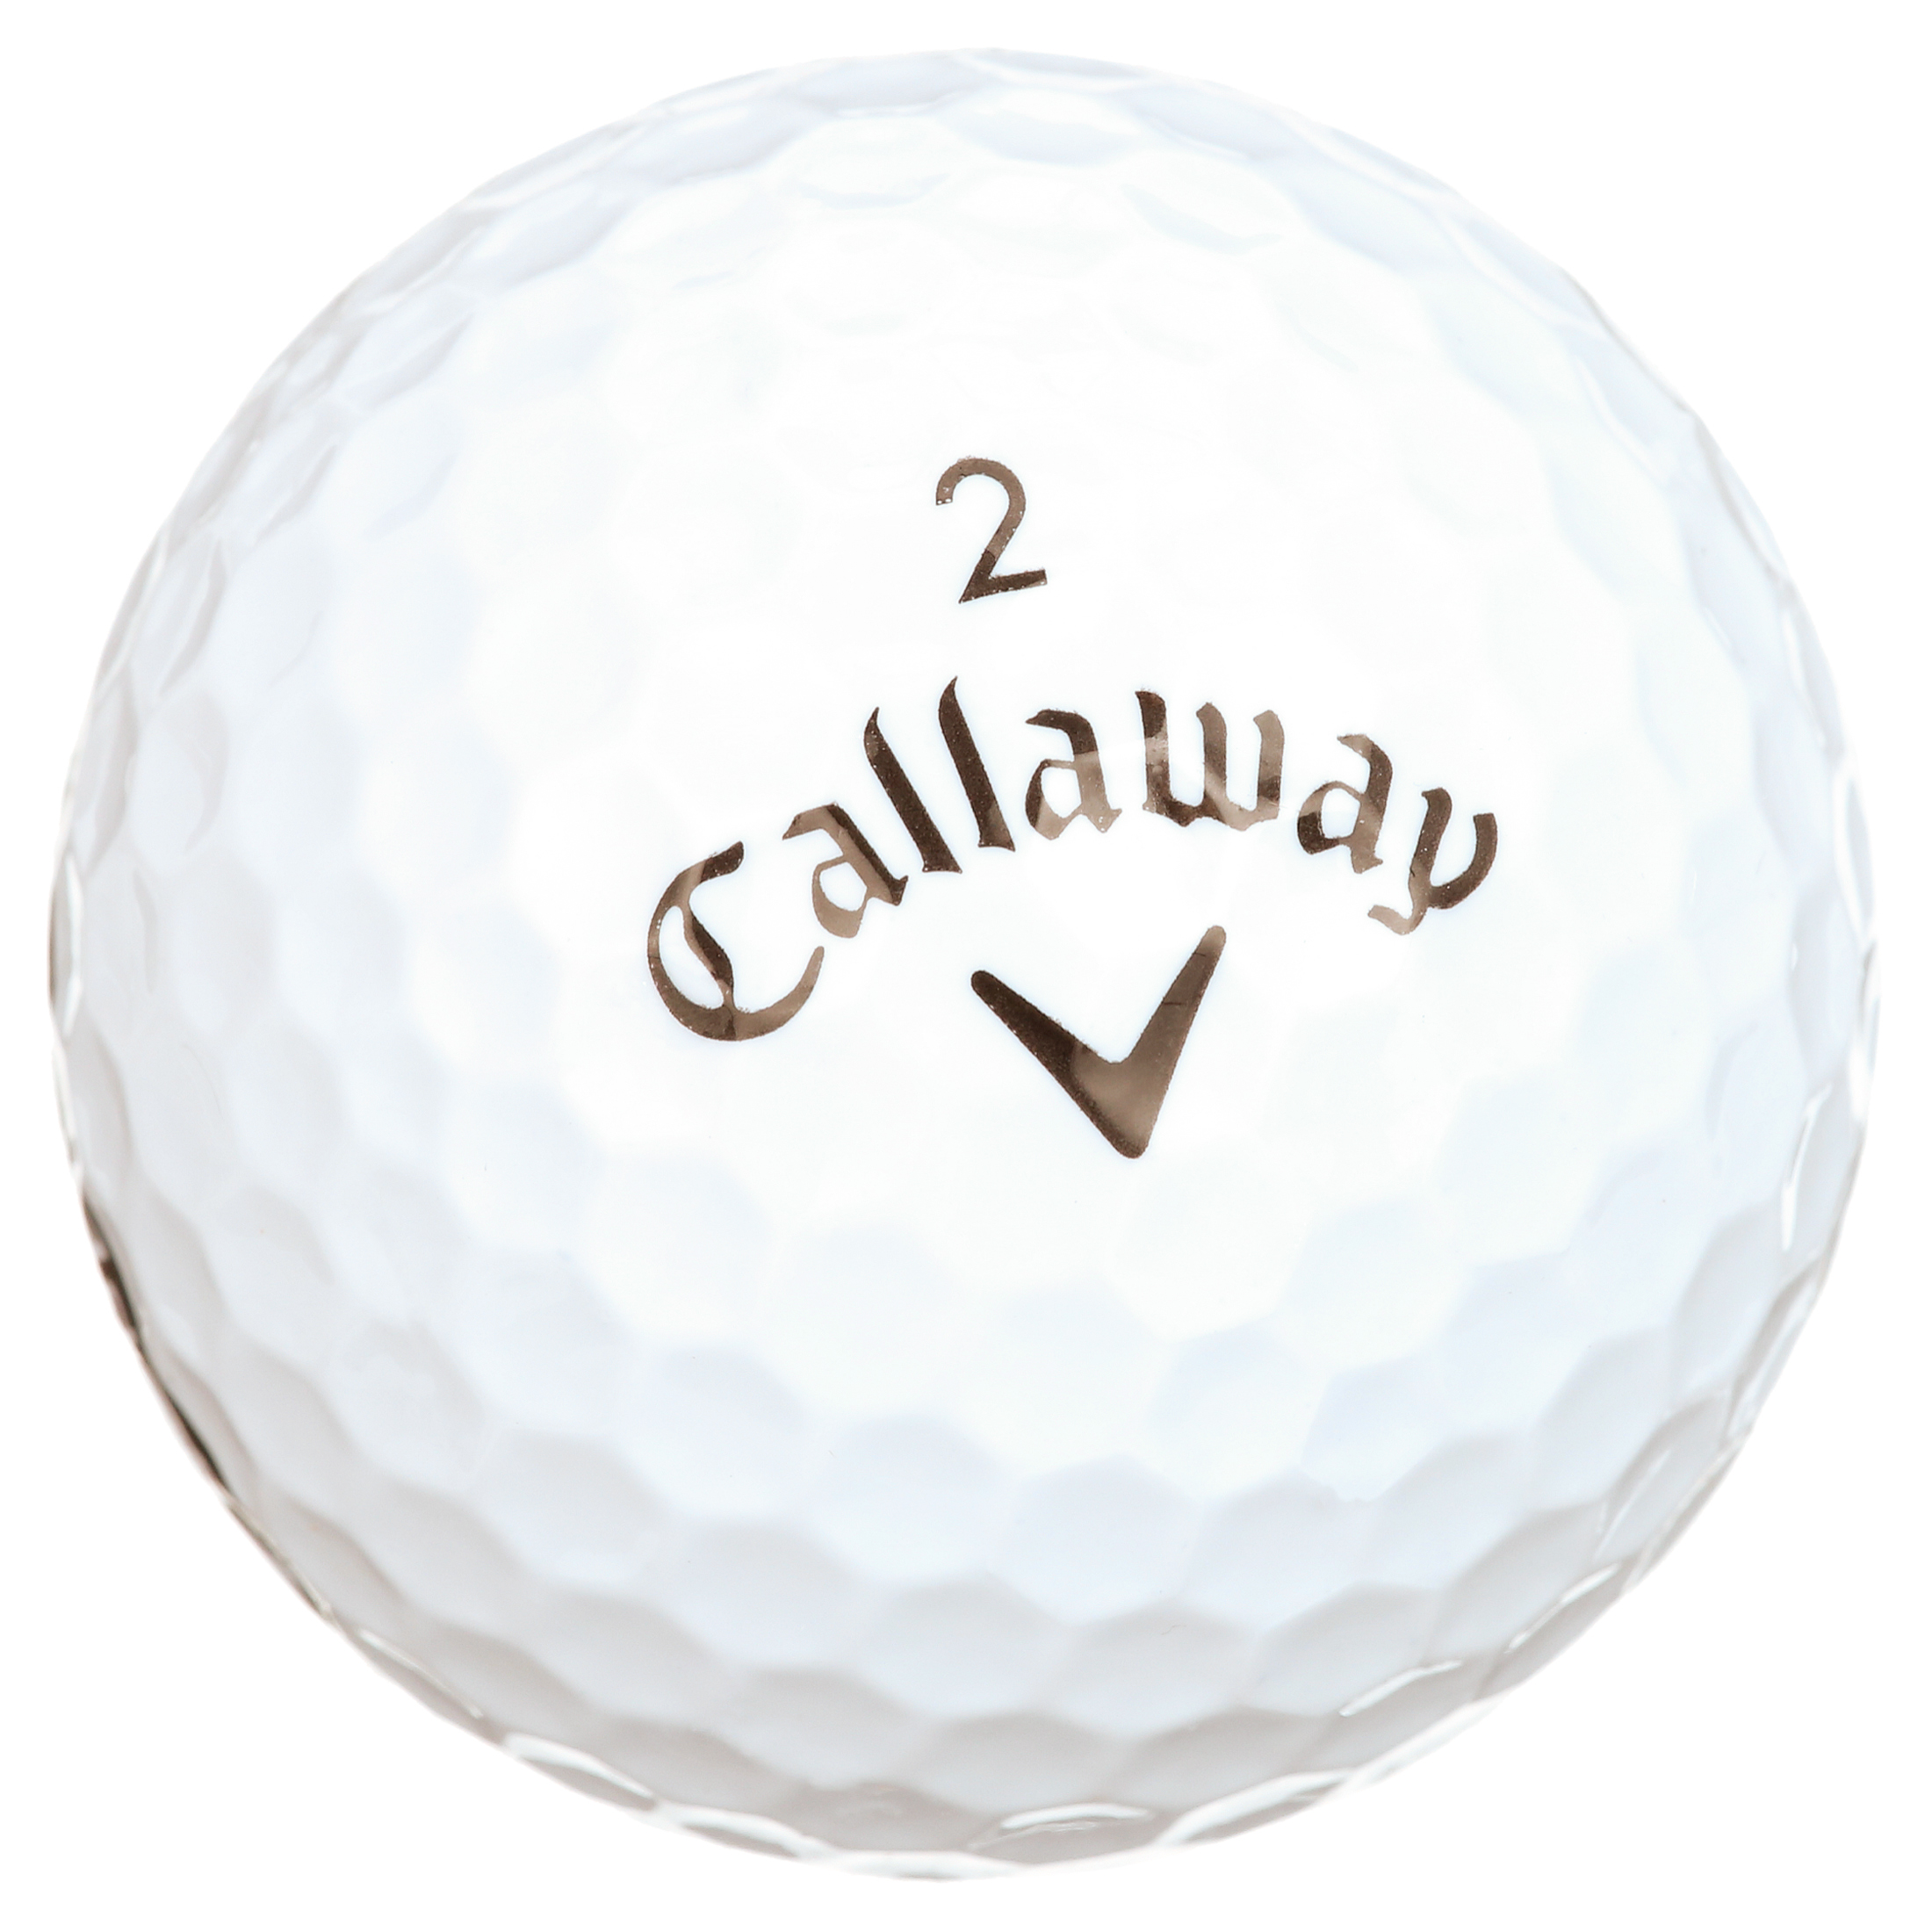 Callaway Supersoft 2021 Golf Balls, White, 12 Pack - image 3 of 6